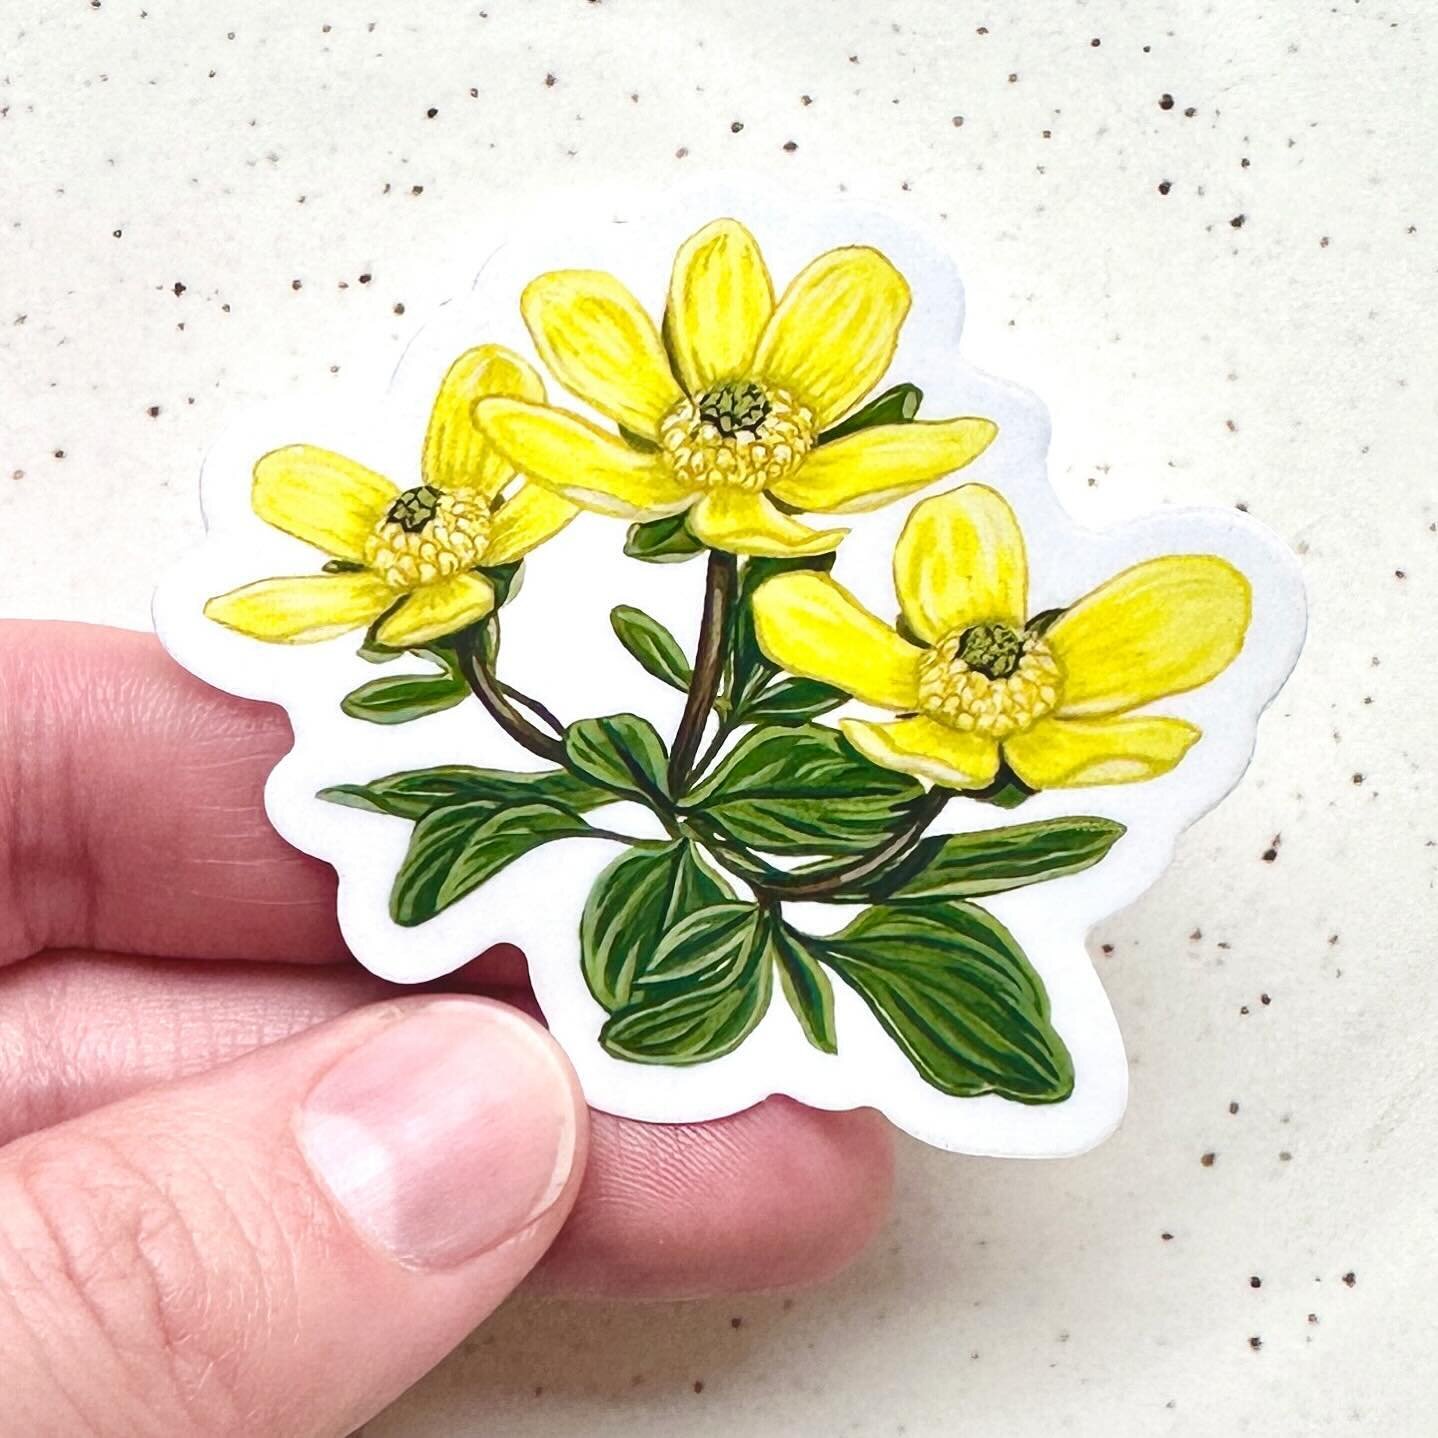 The first spring flower to bloom in the Okanagan. Sagebrush Buttercup, Ranunculus glaberrimus. 
Vinyl stickers available in my shop.